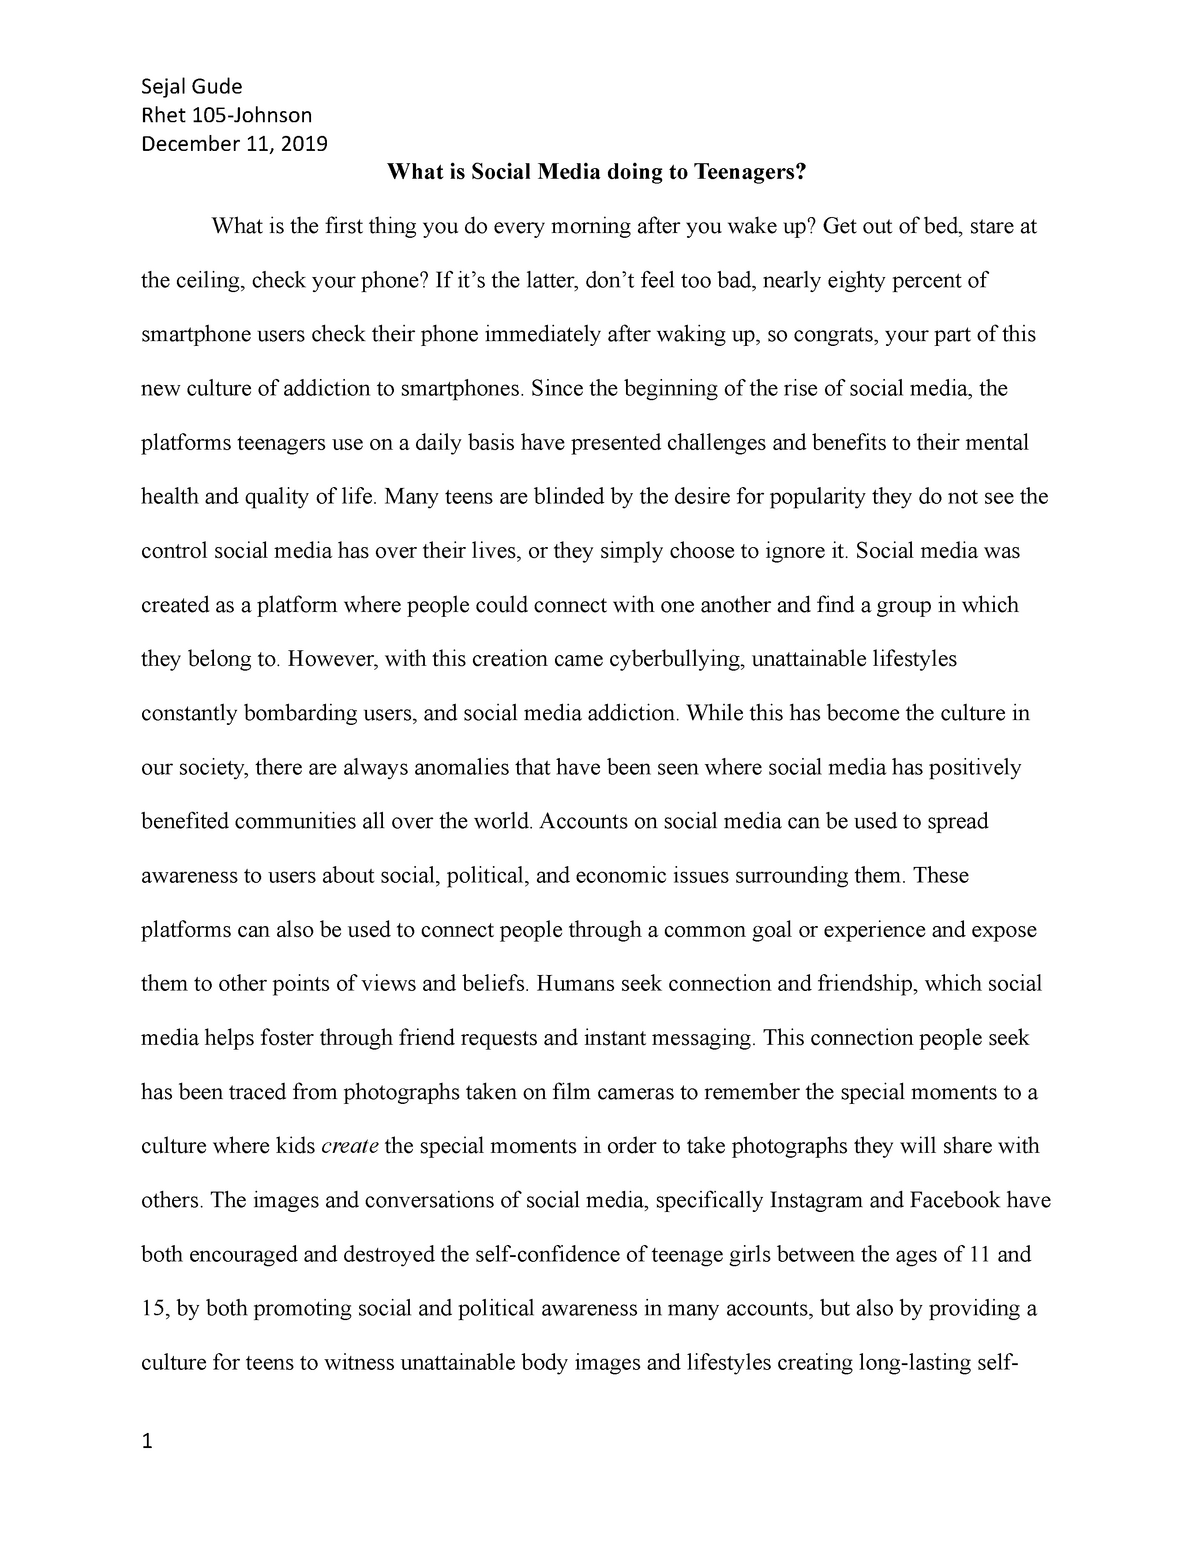 example of research paper pdf about social media